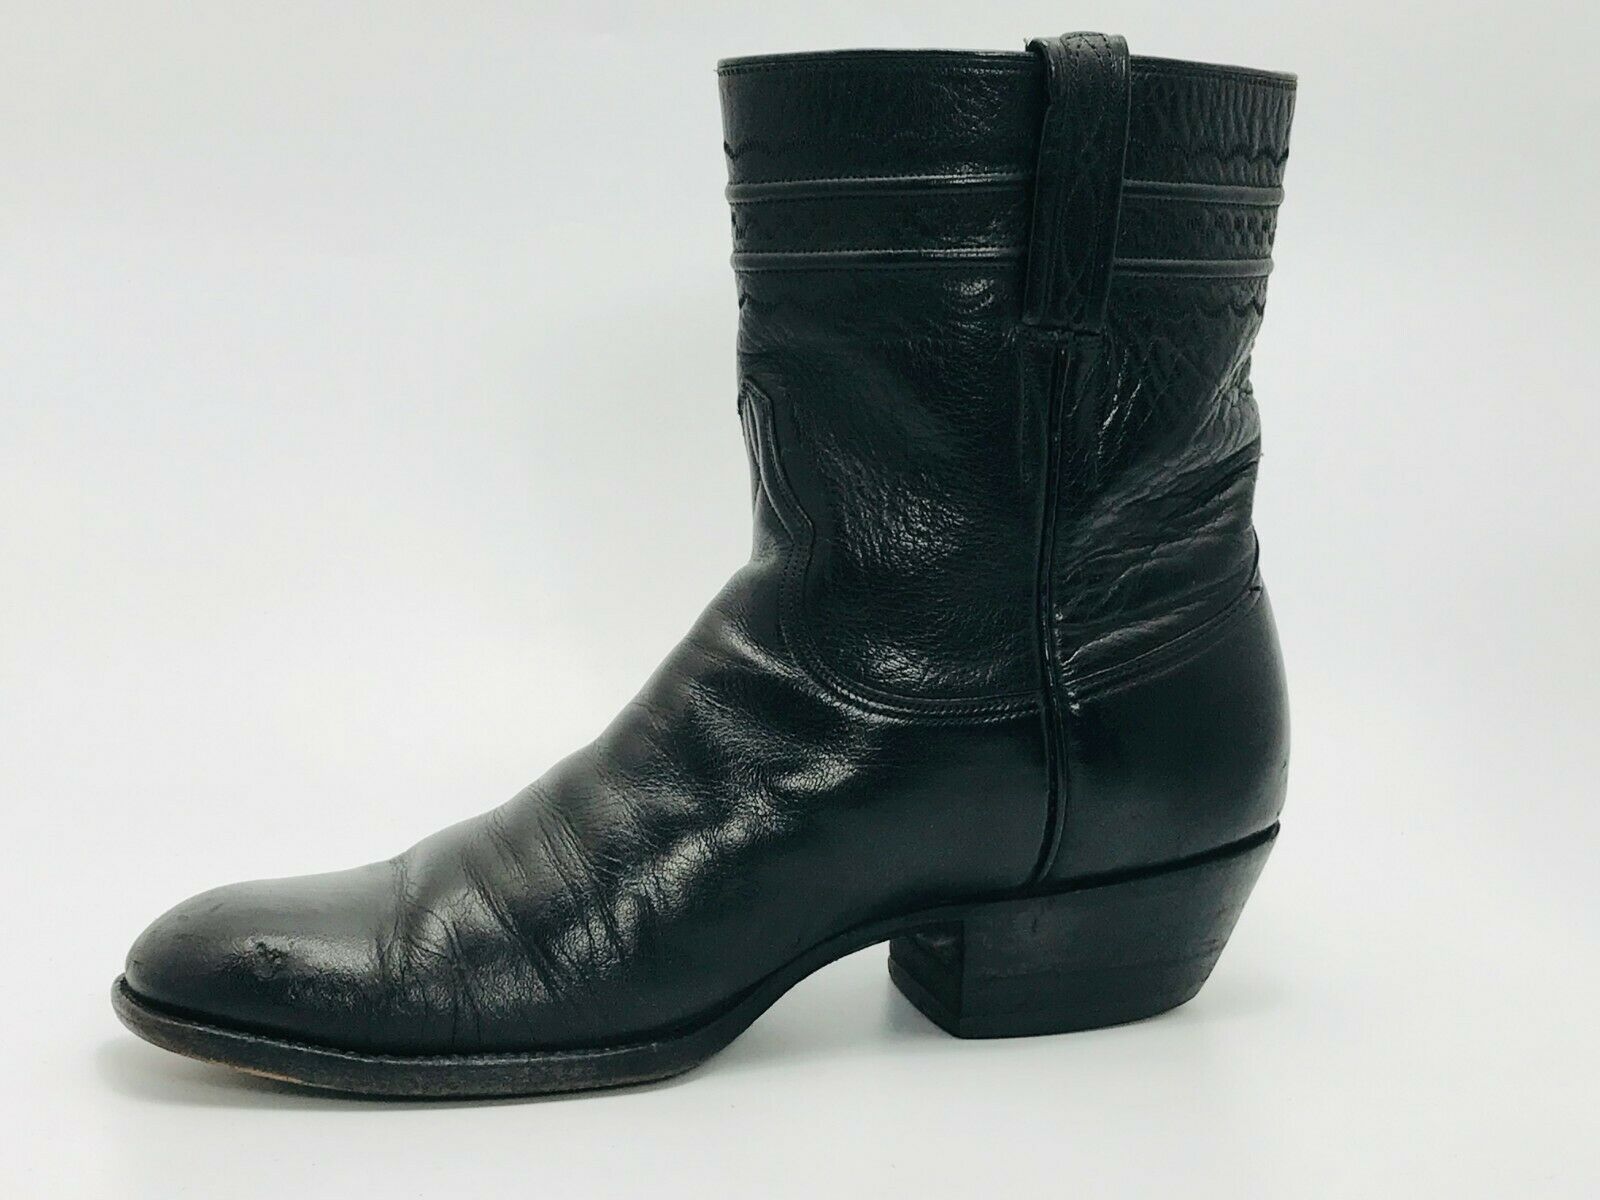 Lucchese Men's San Antonio Western Boots Black Leather Size 9D - Boots